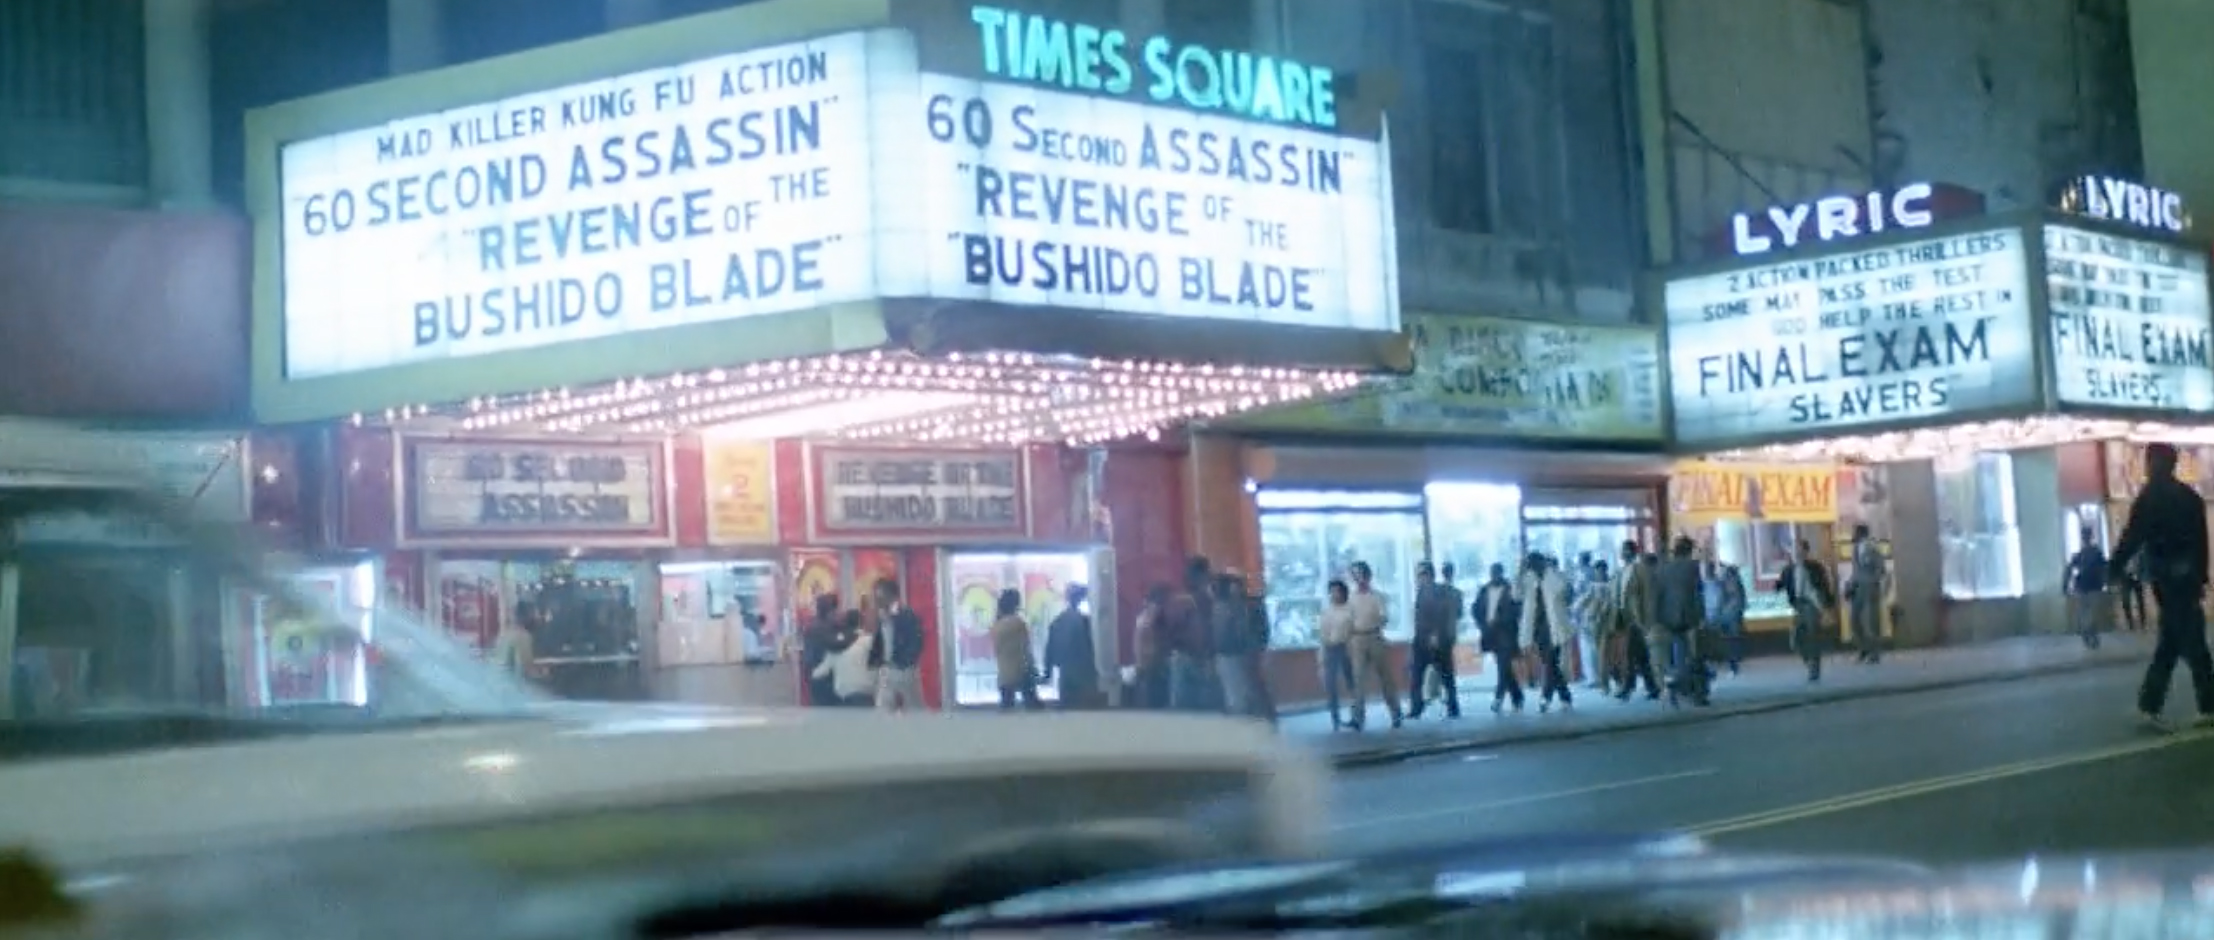 Times Square 1982, The New York Ripper